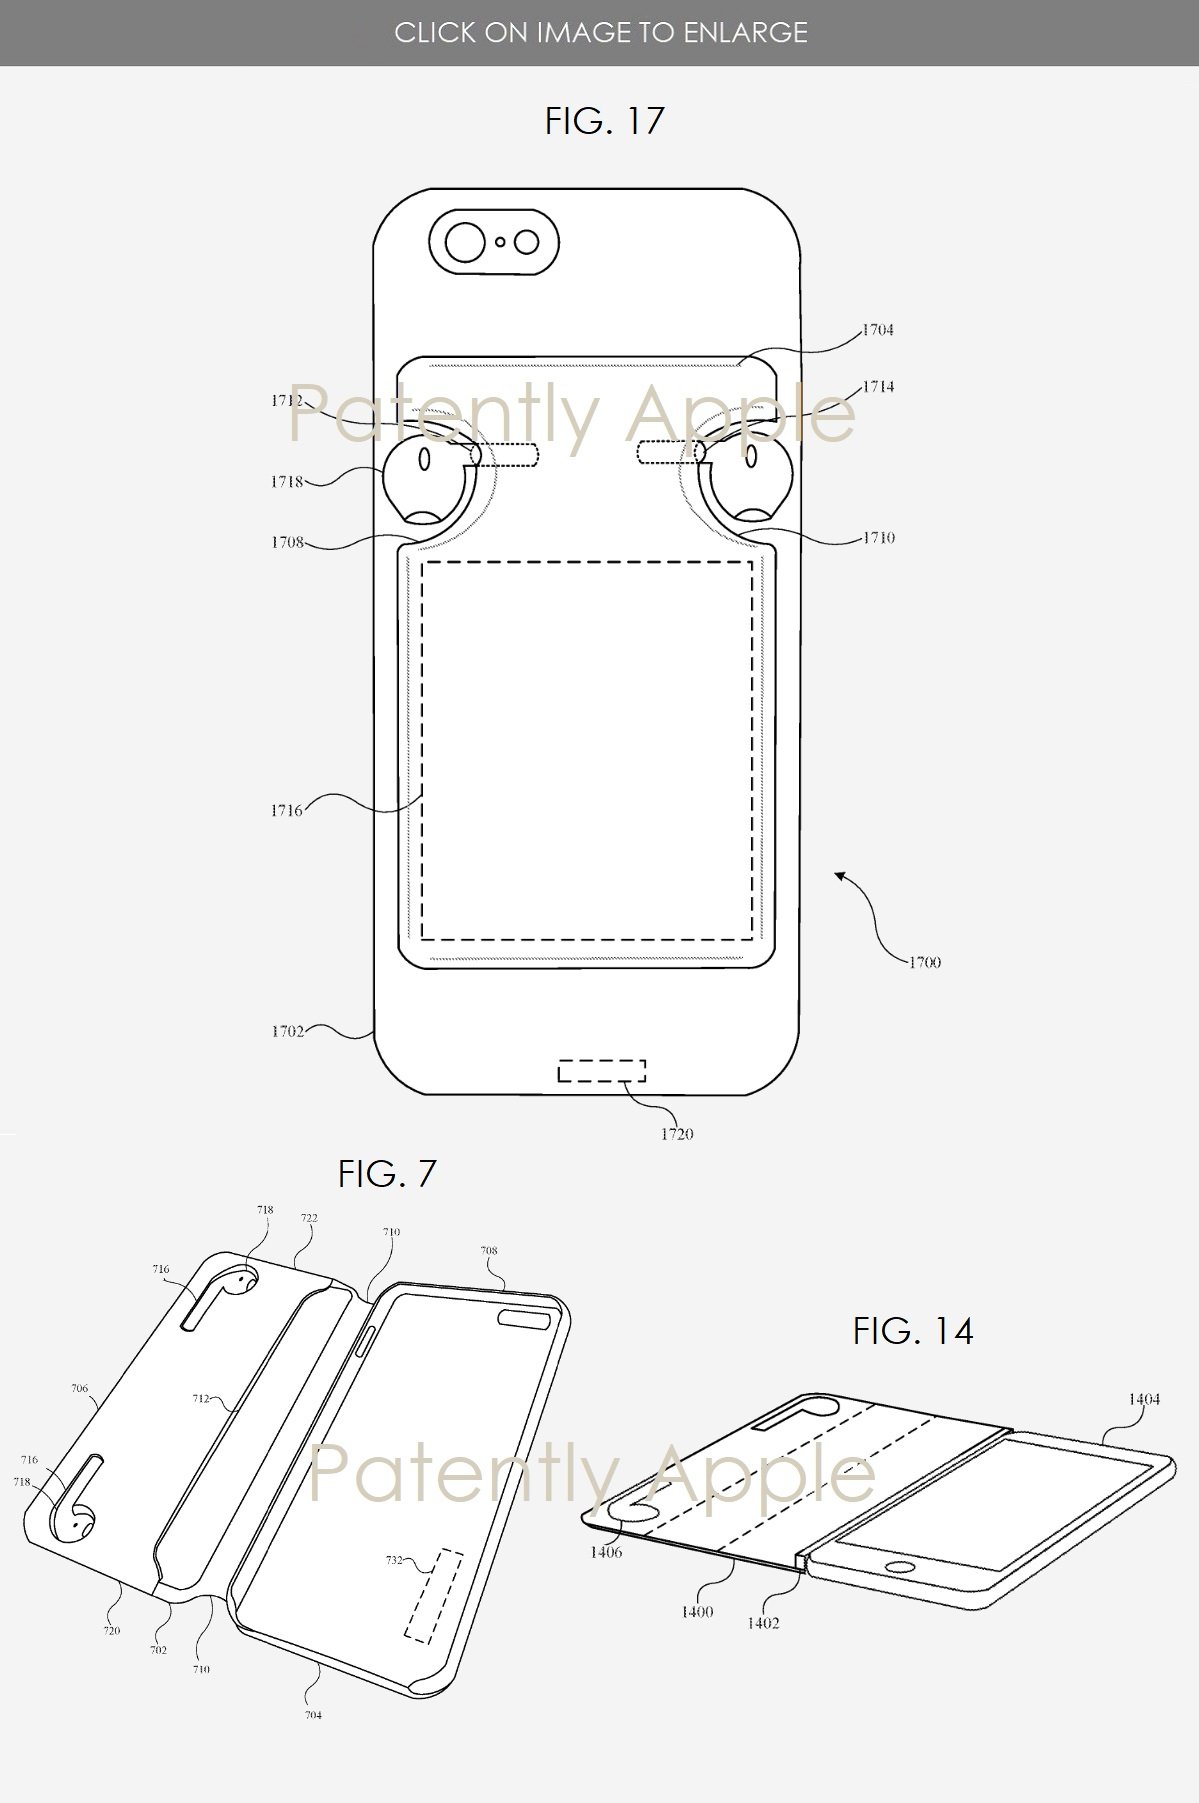 Apple patents new iPhone case, which can house and charge AirPods